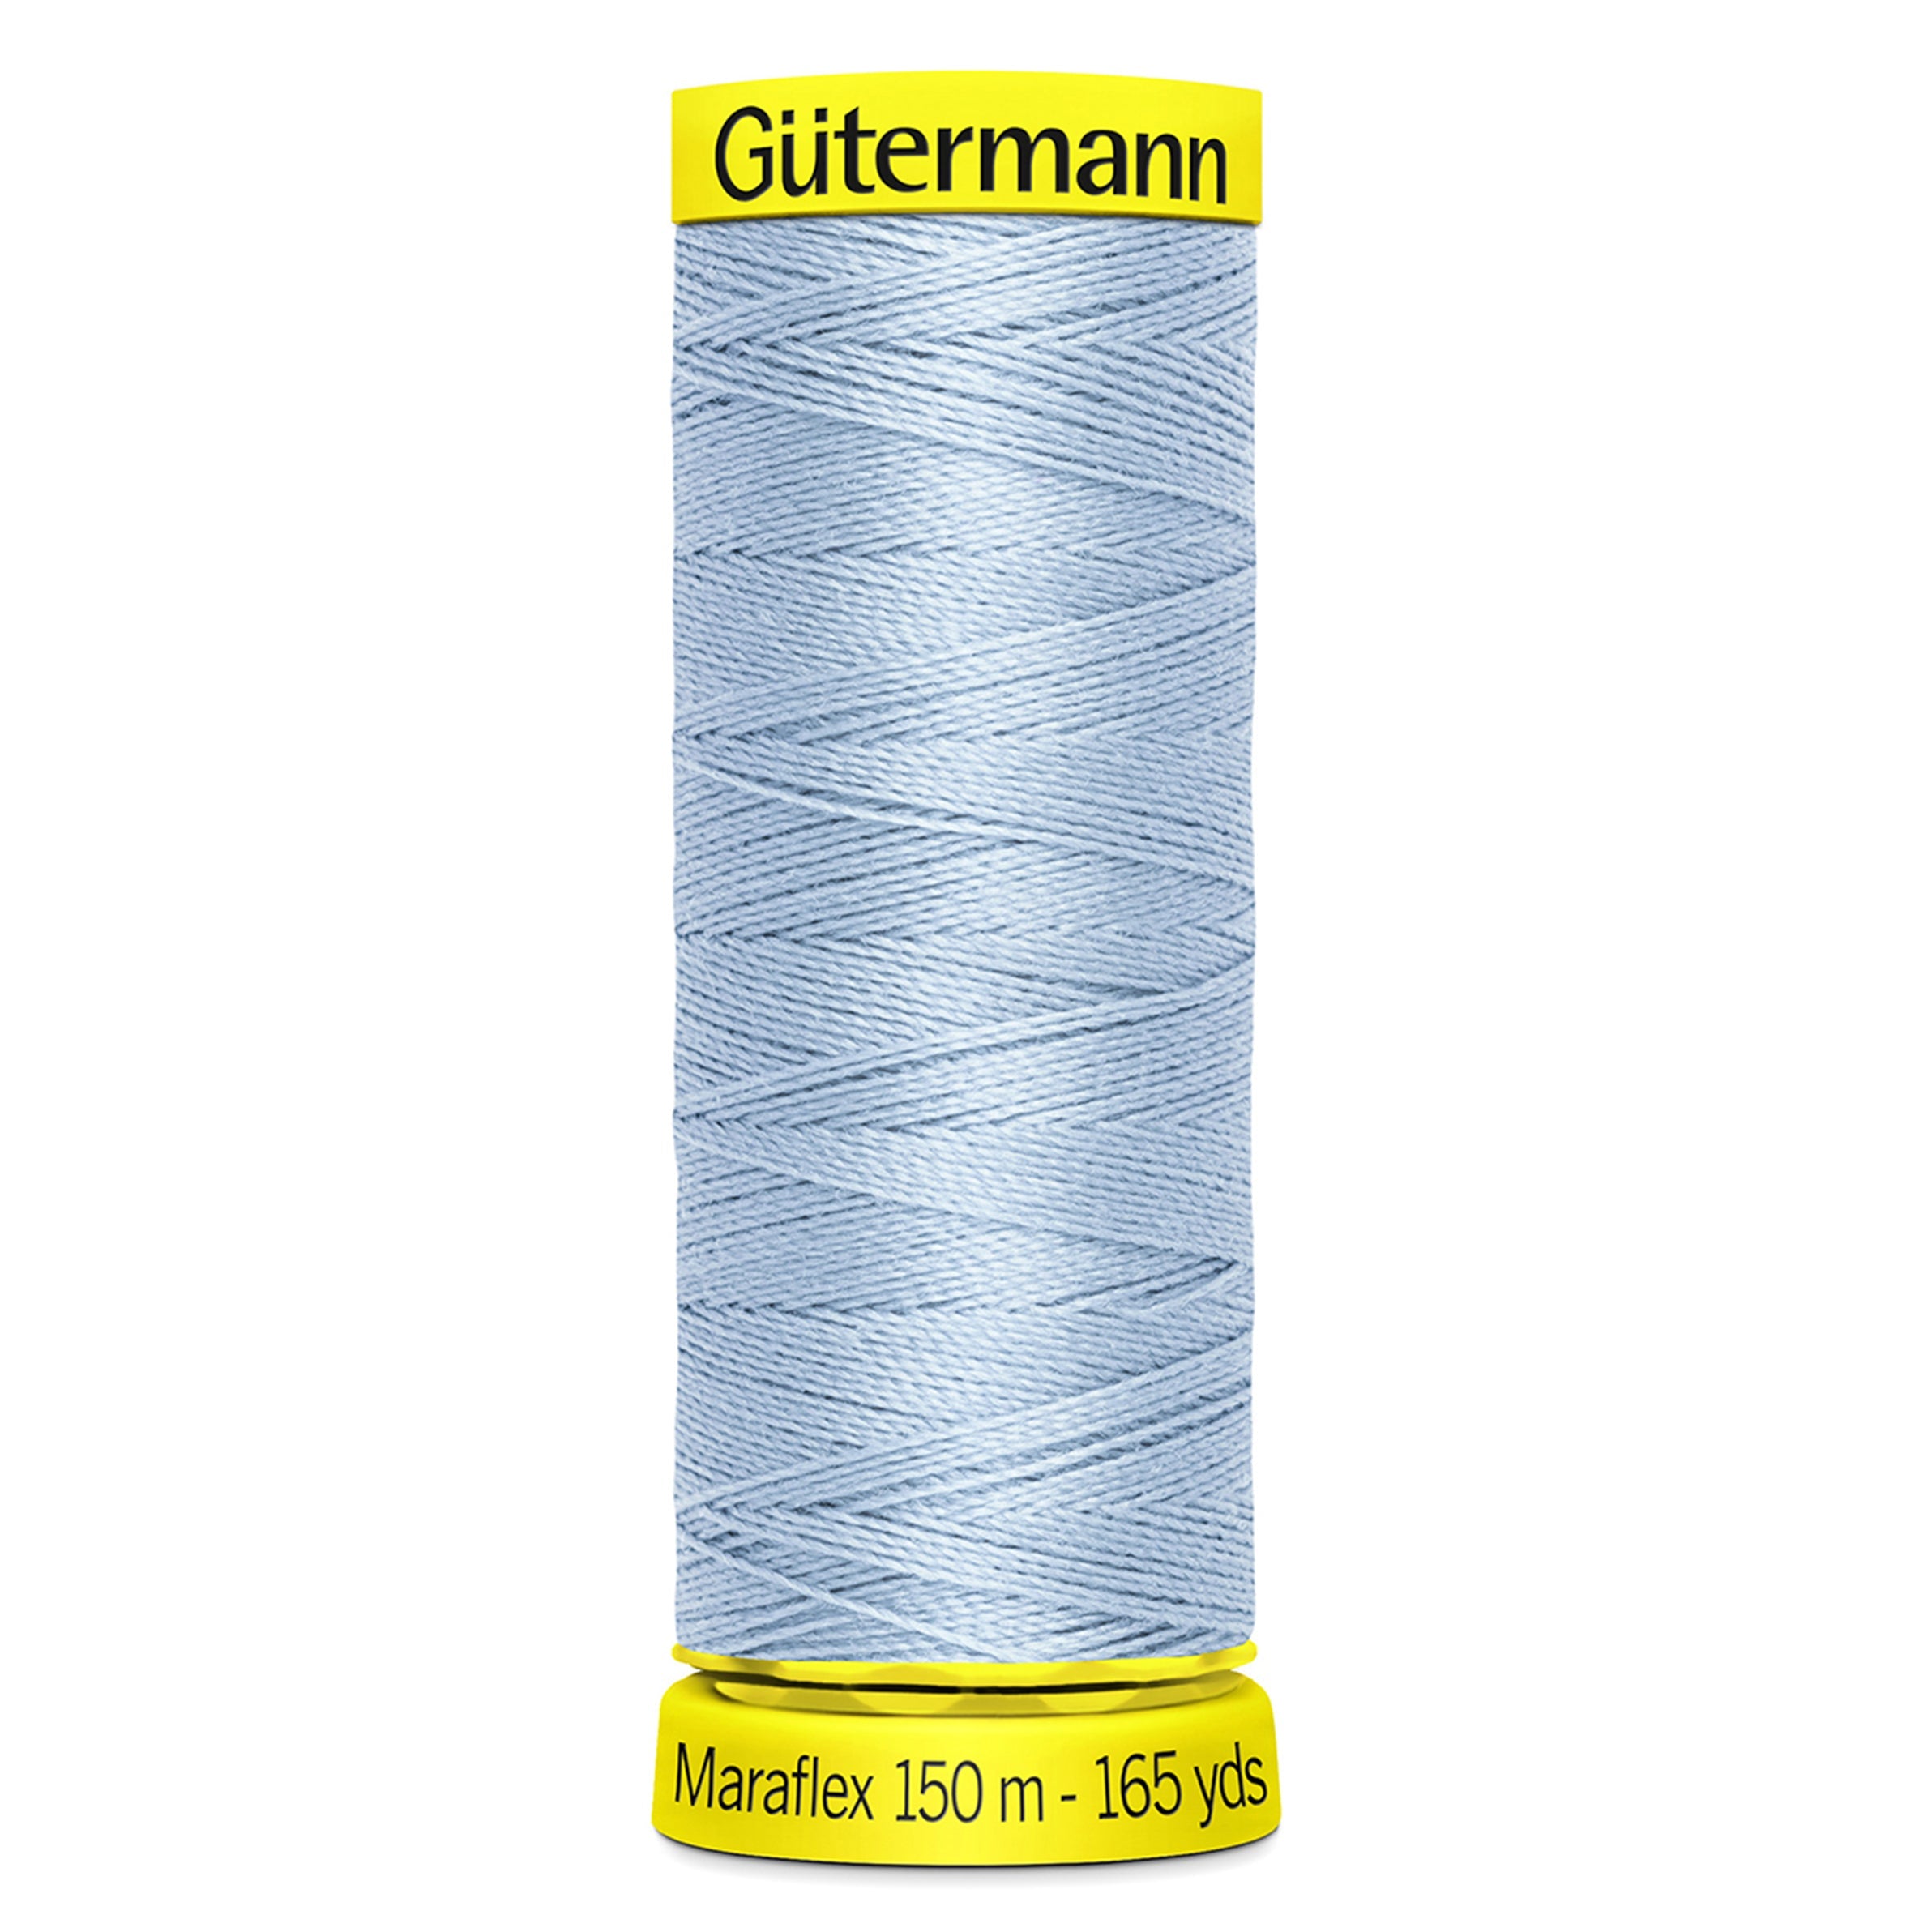 Gutermann Maraflex Stretchy Sewing Thread 150m colour 276 from Jaycotts Sewing Supplies